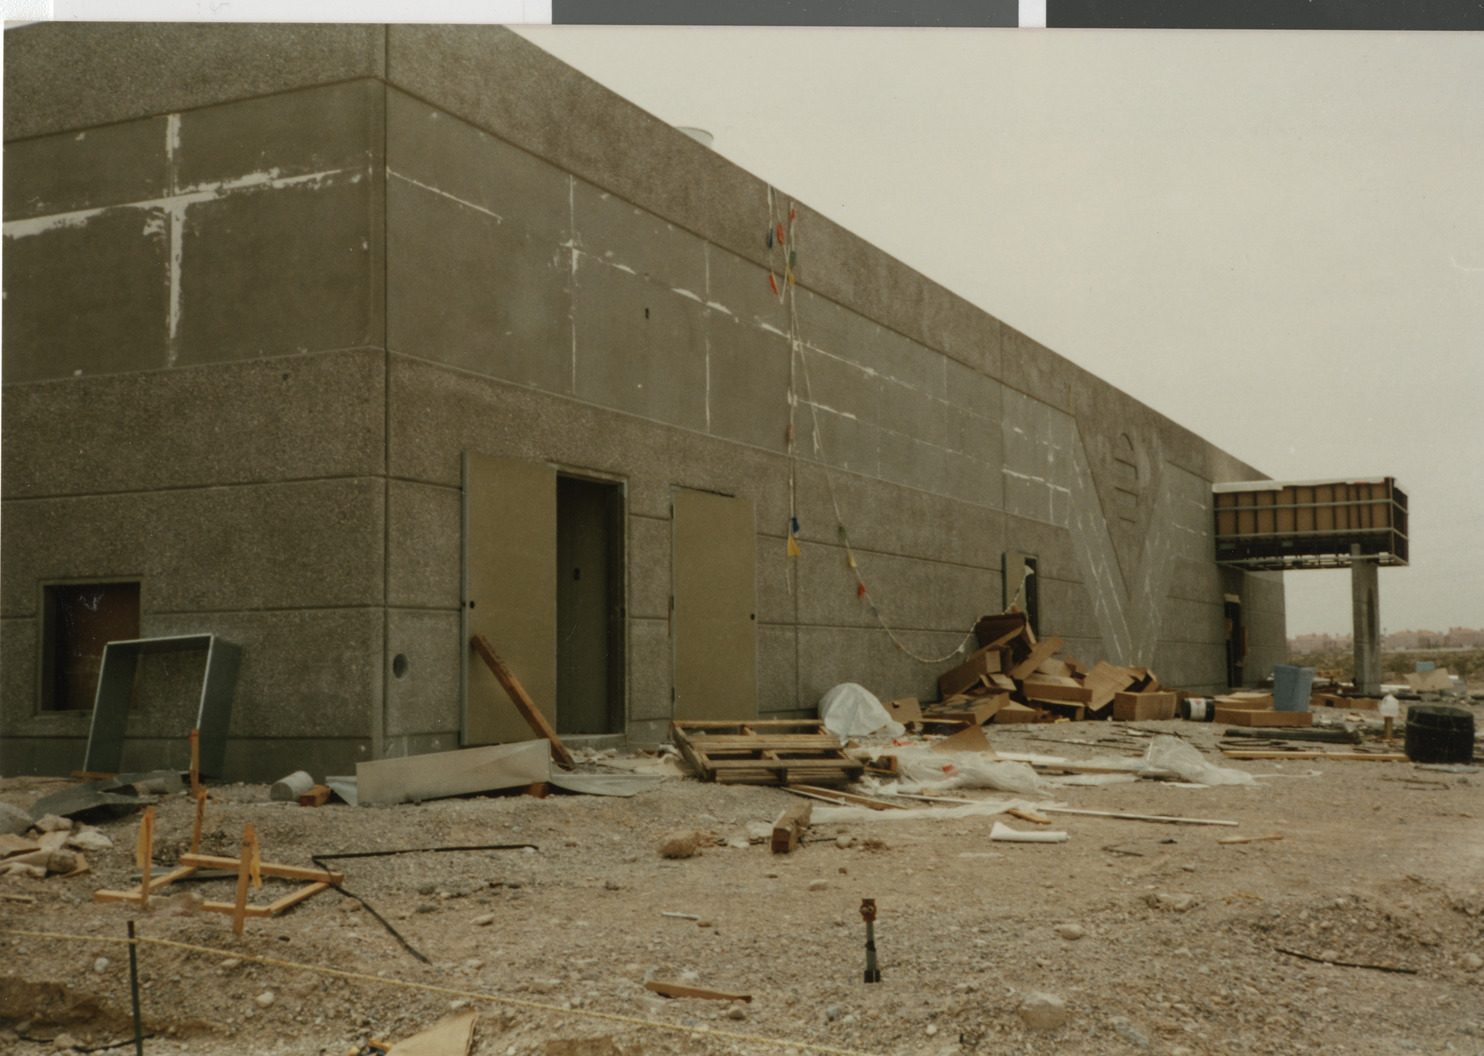 Photograph of the construction of the Dorothy Eisenberg Elementary School, 1989